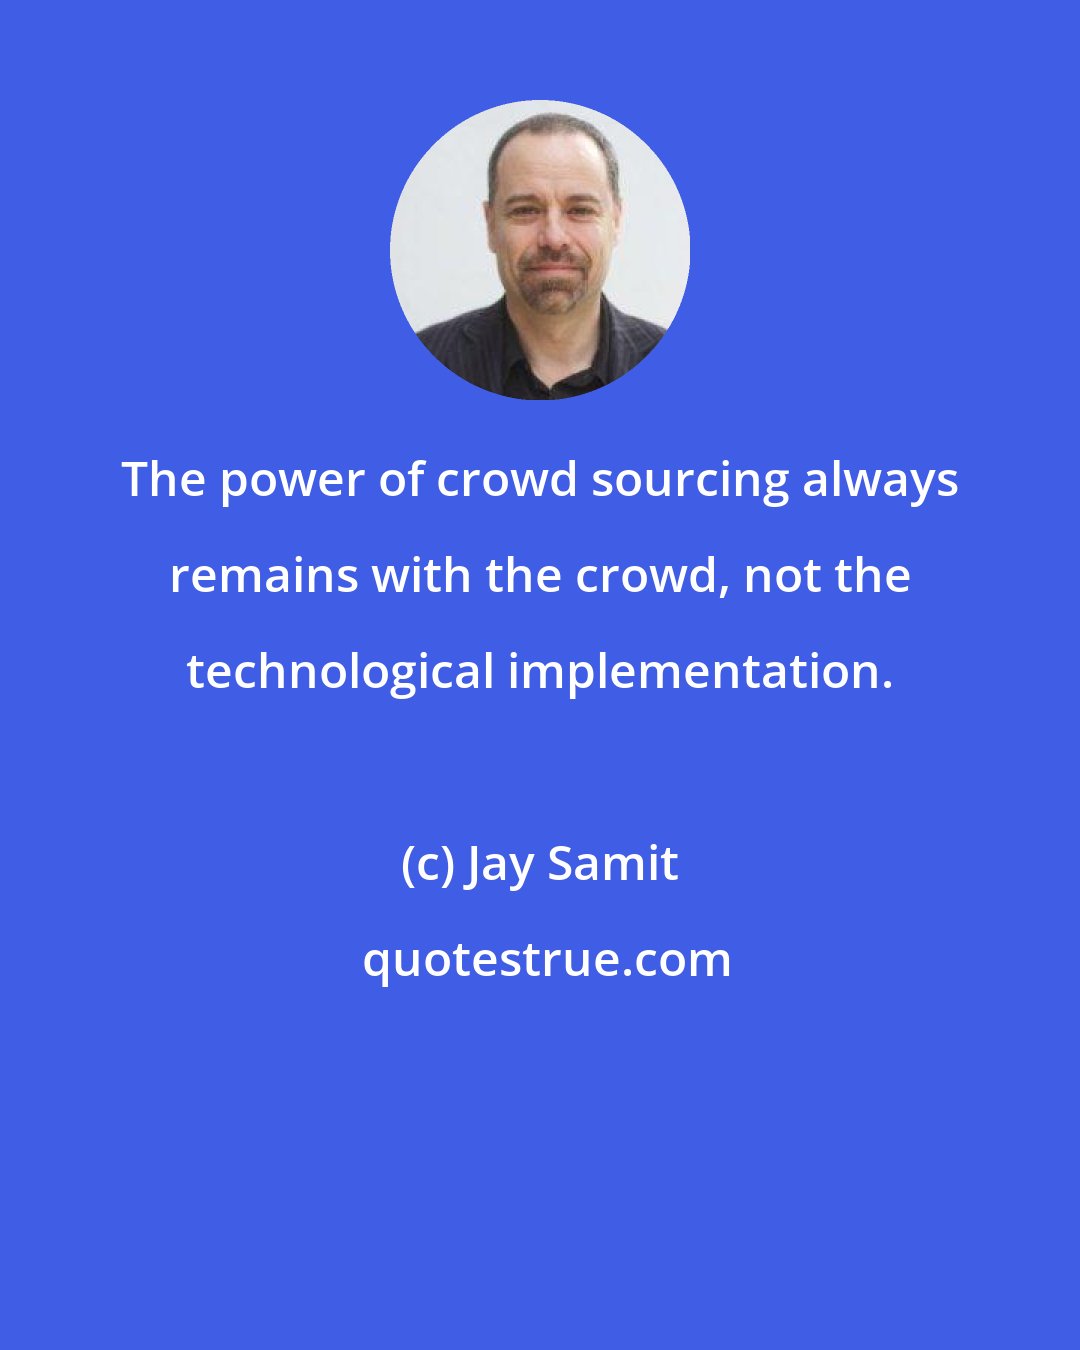 Jay Samit: The power of crowd sourcing always remains with the crowd, not the technological implementation.